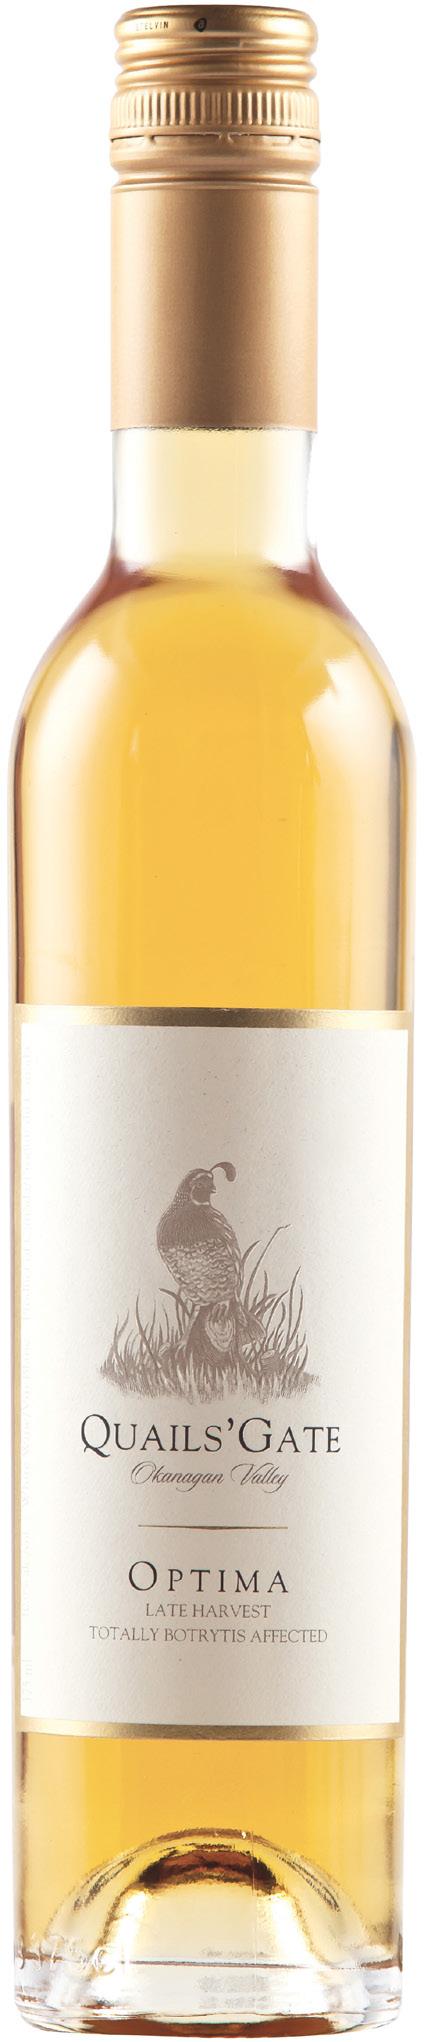 2017 BOTRYTIS For over 25 years Quails Gate has become known for this wonderfully unique dessert wine.